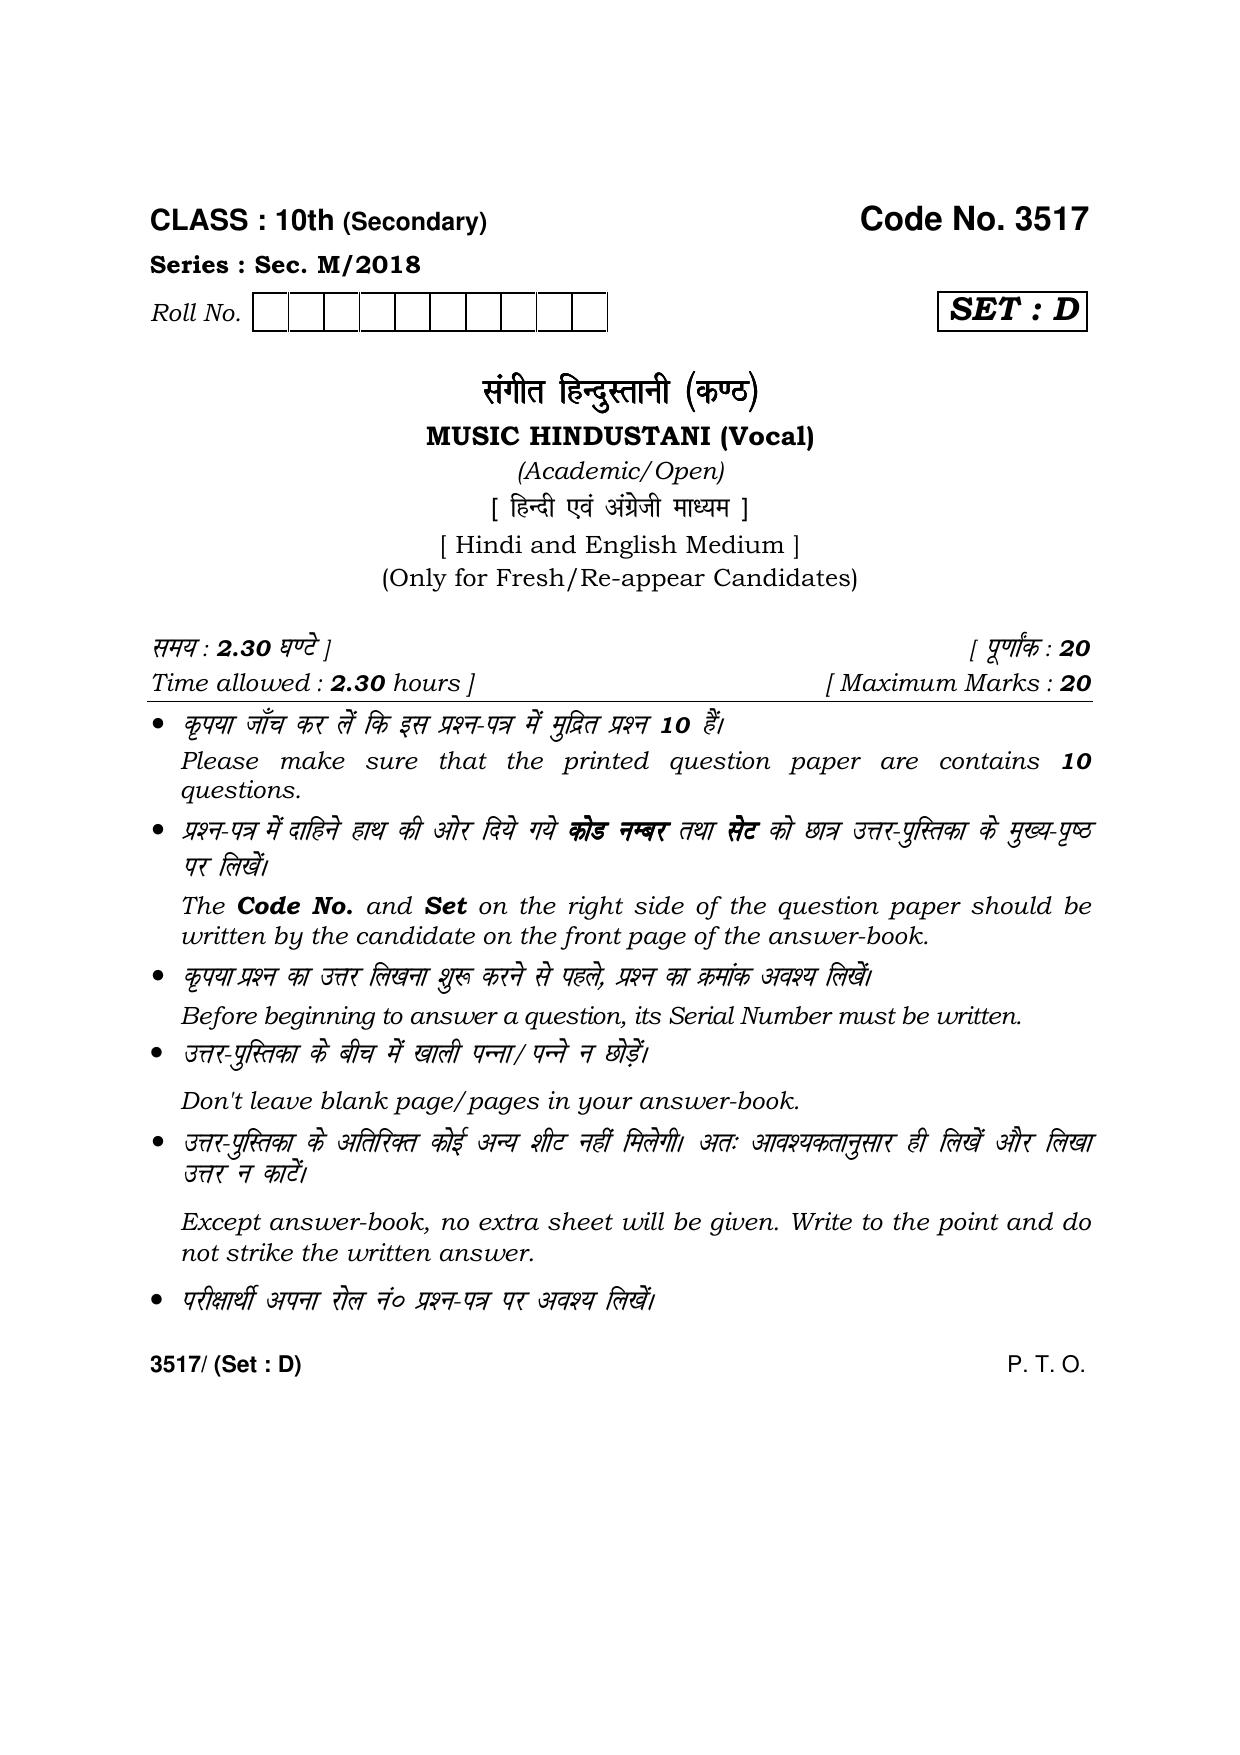 Haryana Board HBSE Class 10 Music Hindustani (Vocal) -D 2018 Question Paper - Page 1